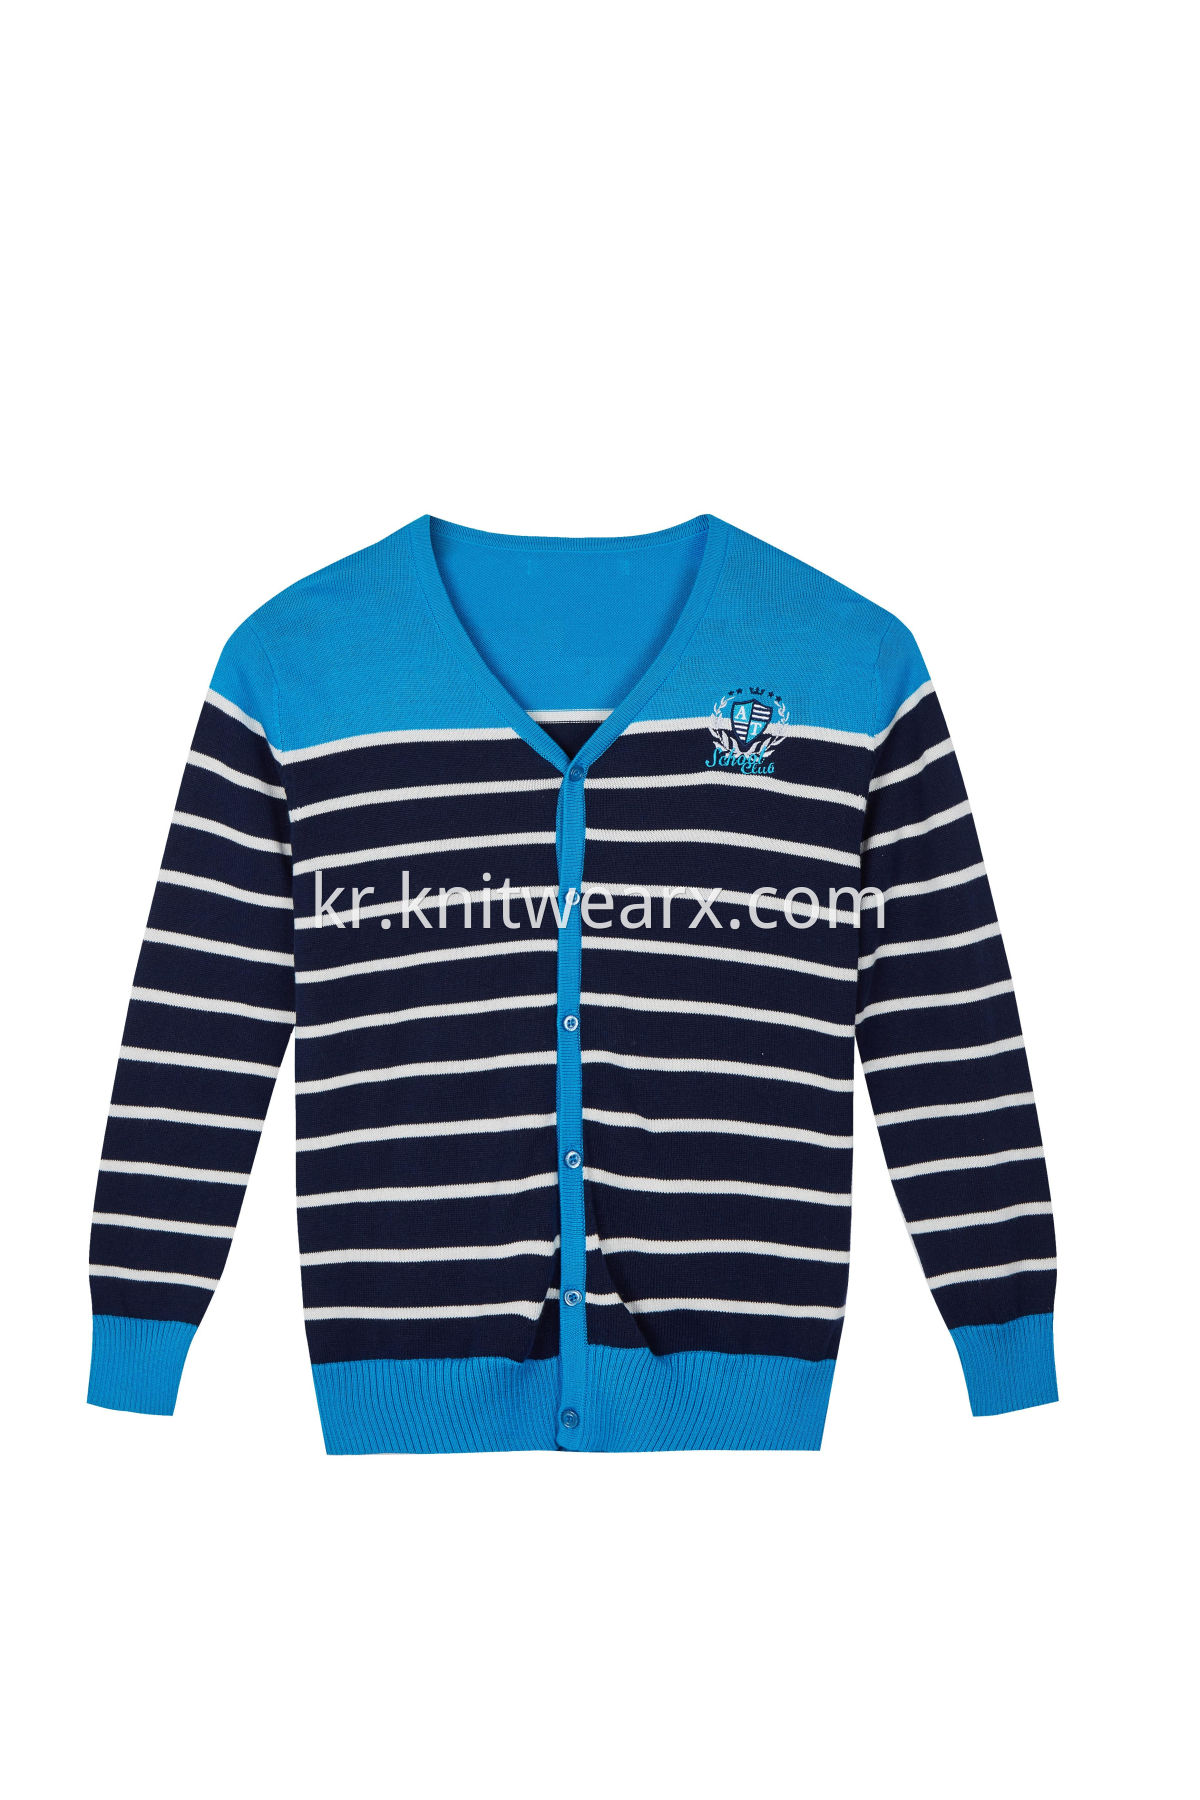 Boy's Stripe Cardigan V-Neck Knitted Long Sleeve Pullover Sweater